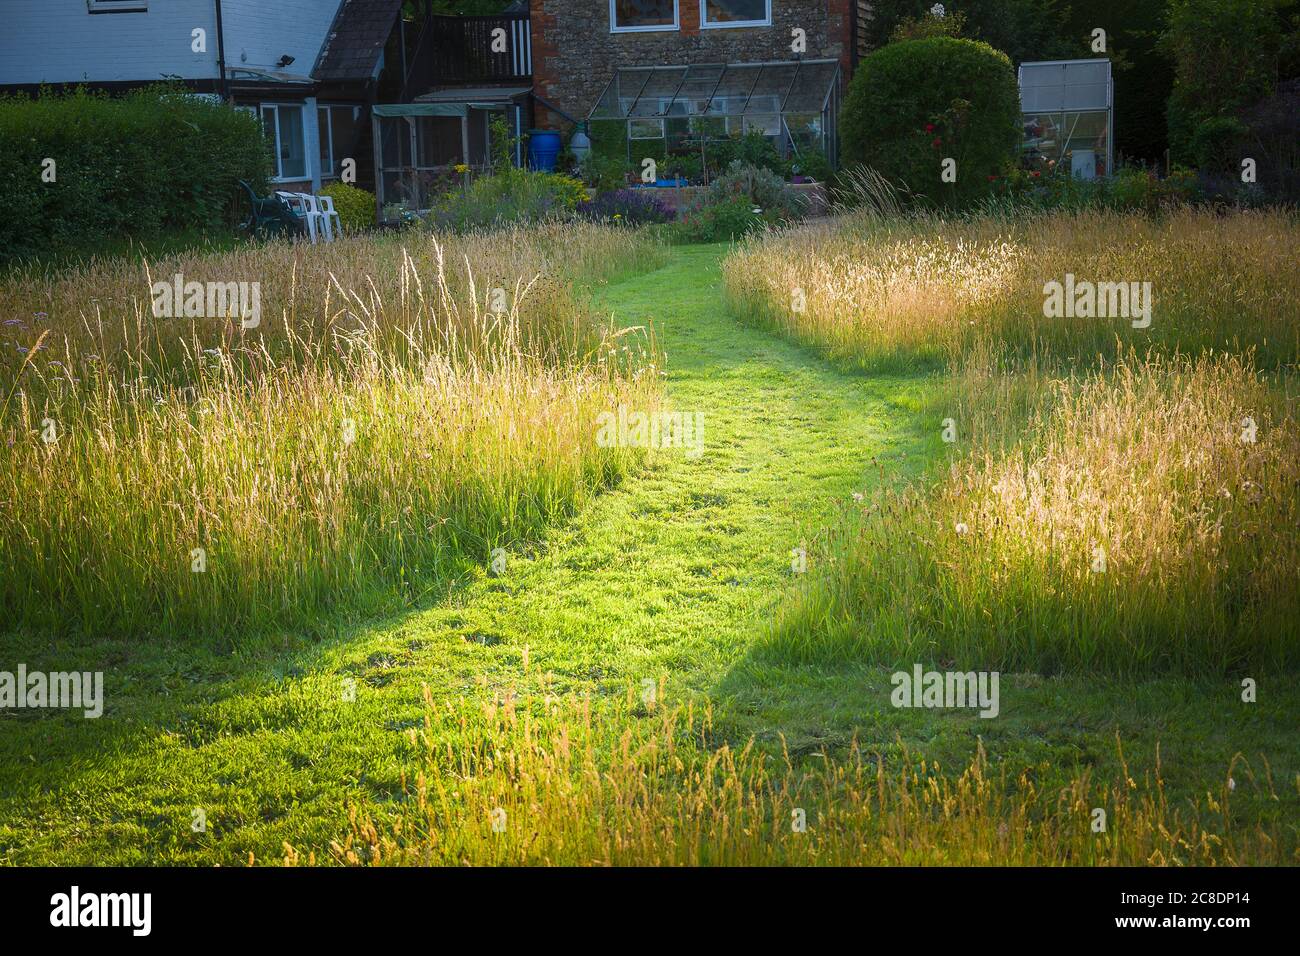 Evening light shines down a grass pathway across a grass lawn with areas allowed to grow and flower before late summer mowing Stock Photo